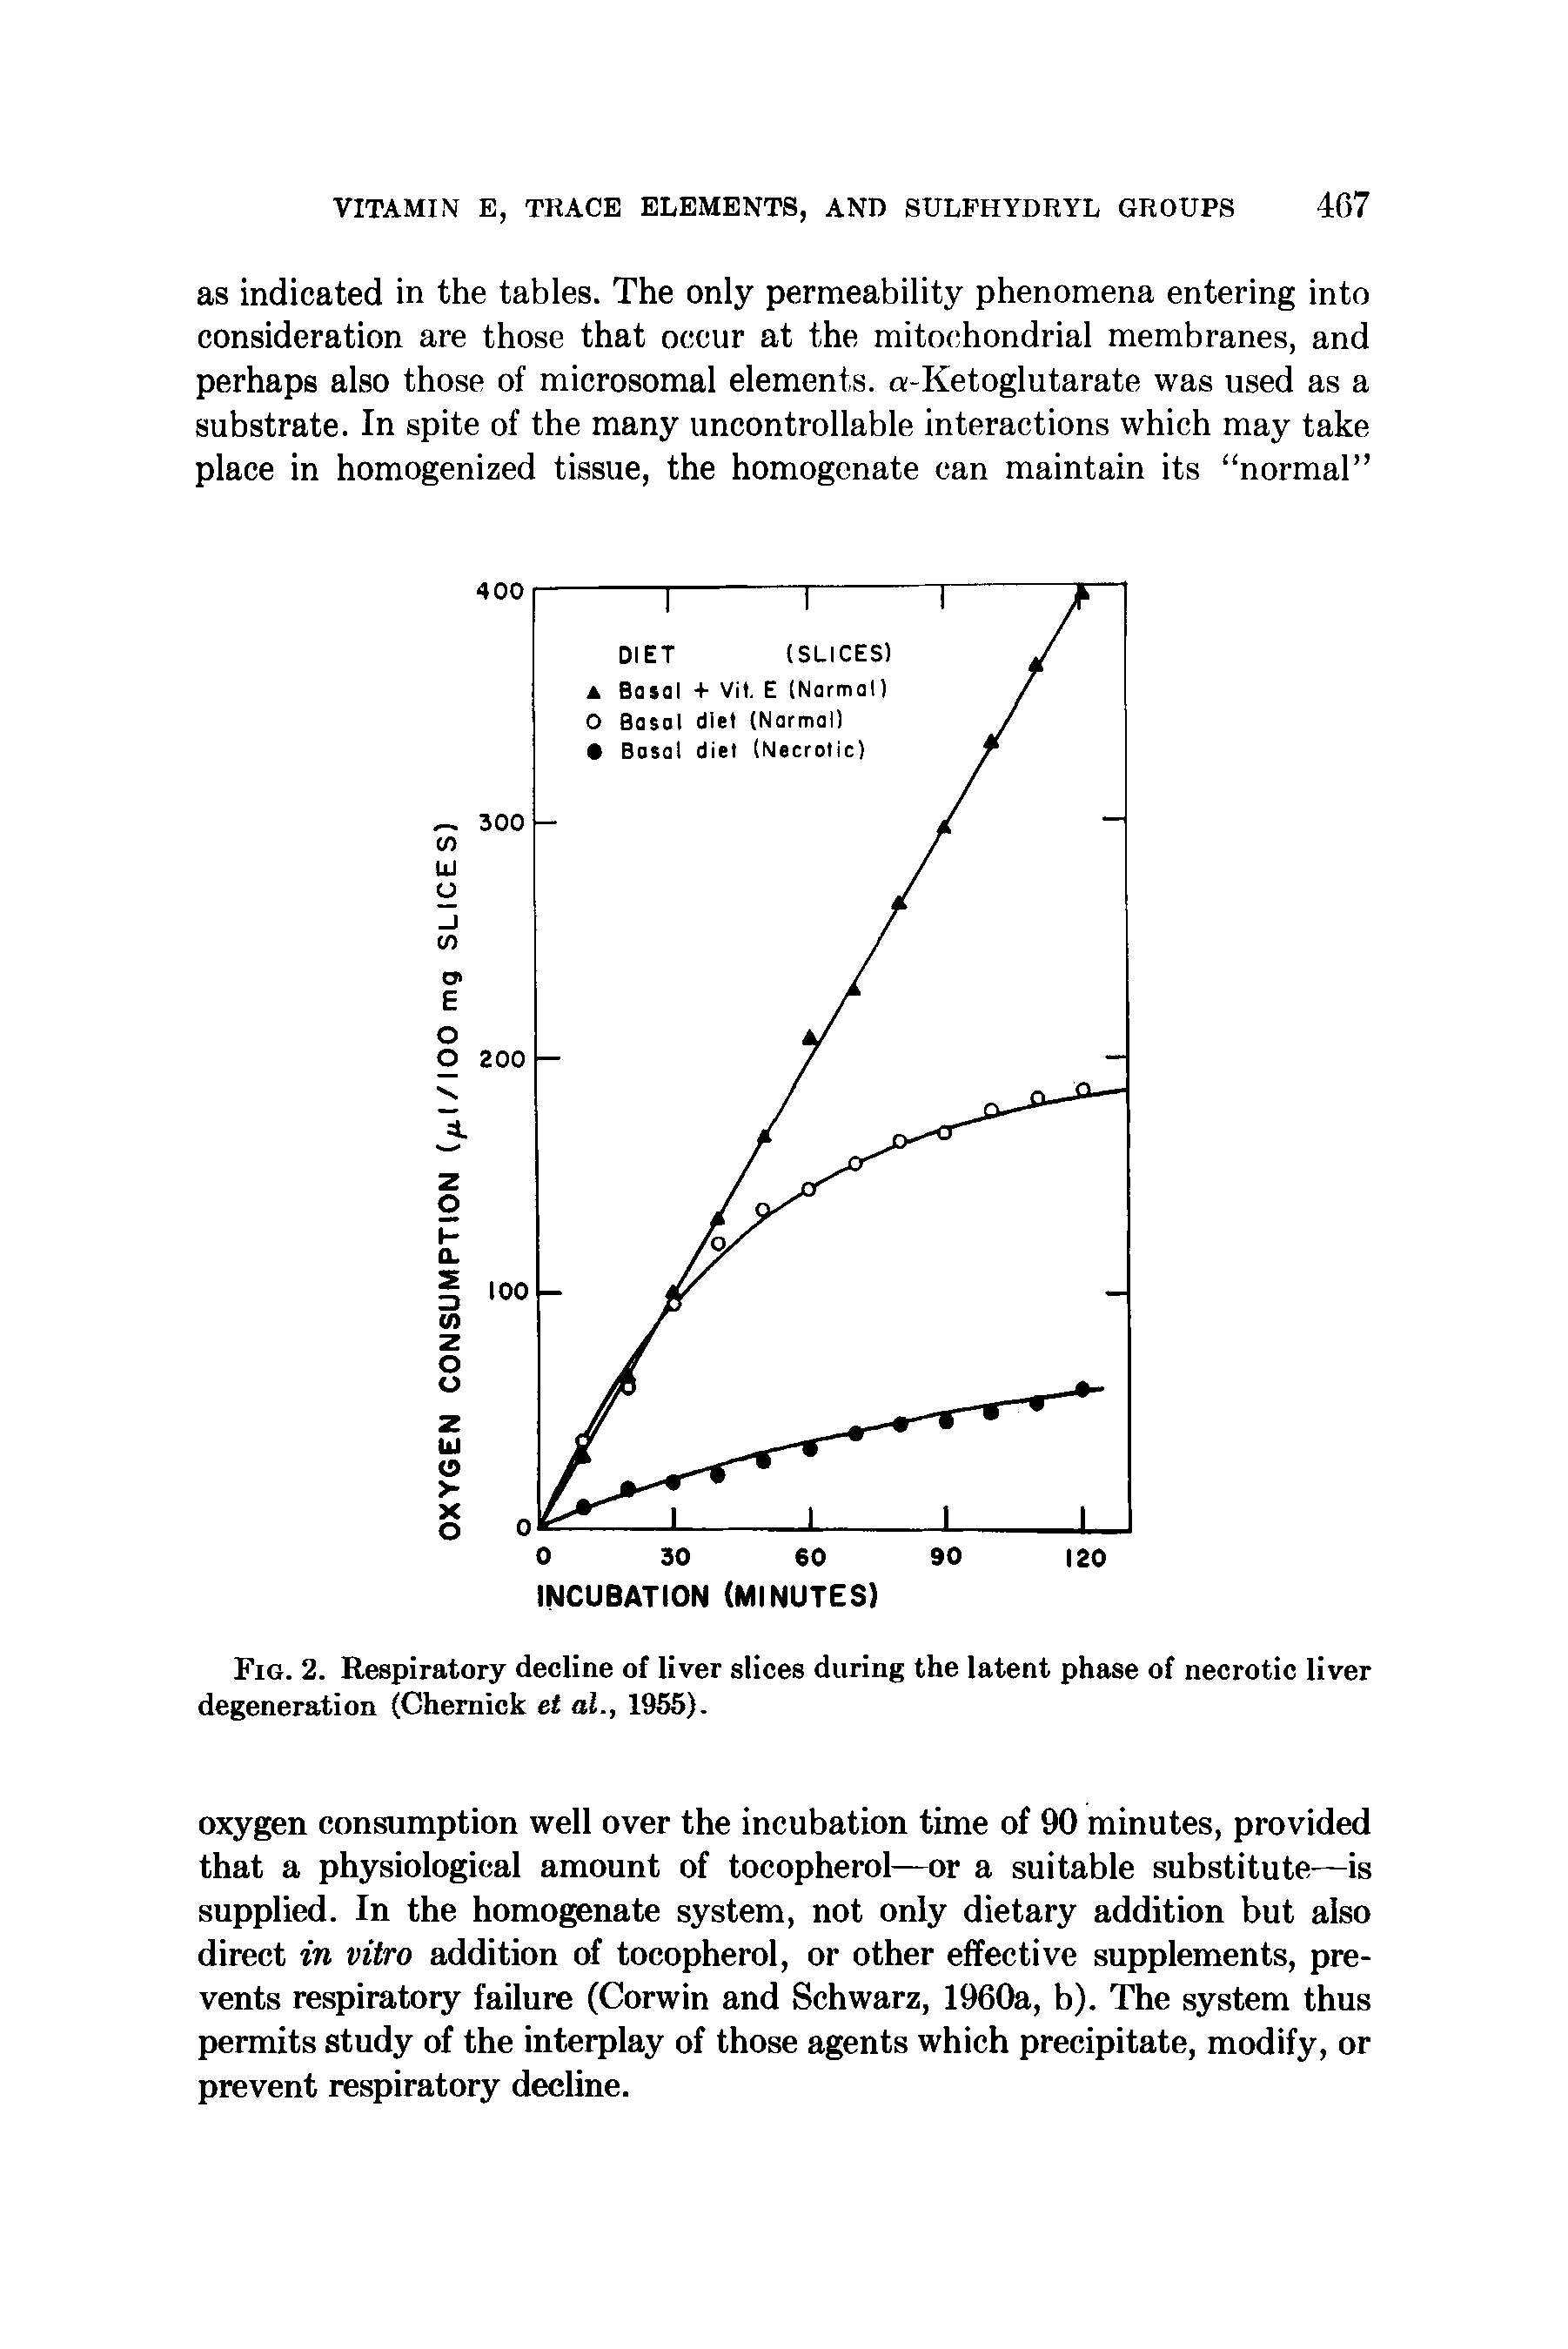 Fig. 2. Respiratory decline of liver slices during the latent phase of necrotic liver degeneration (Chemick et al., 1955).